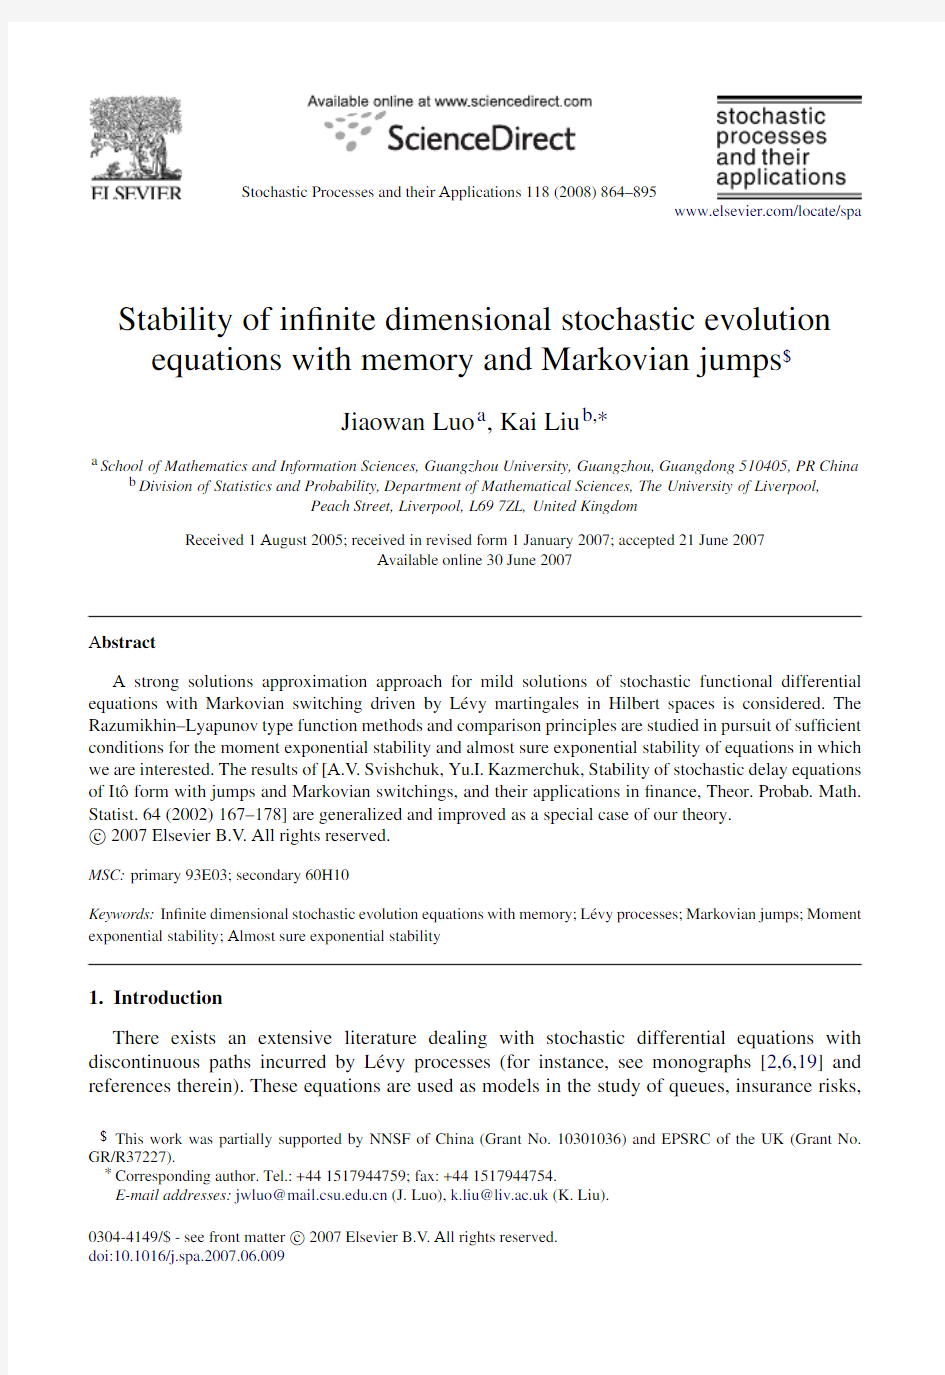 Stability of infinite dimensional stochastic evolution